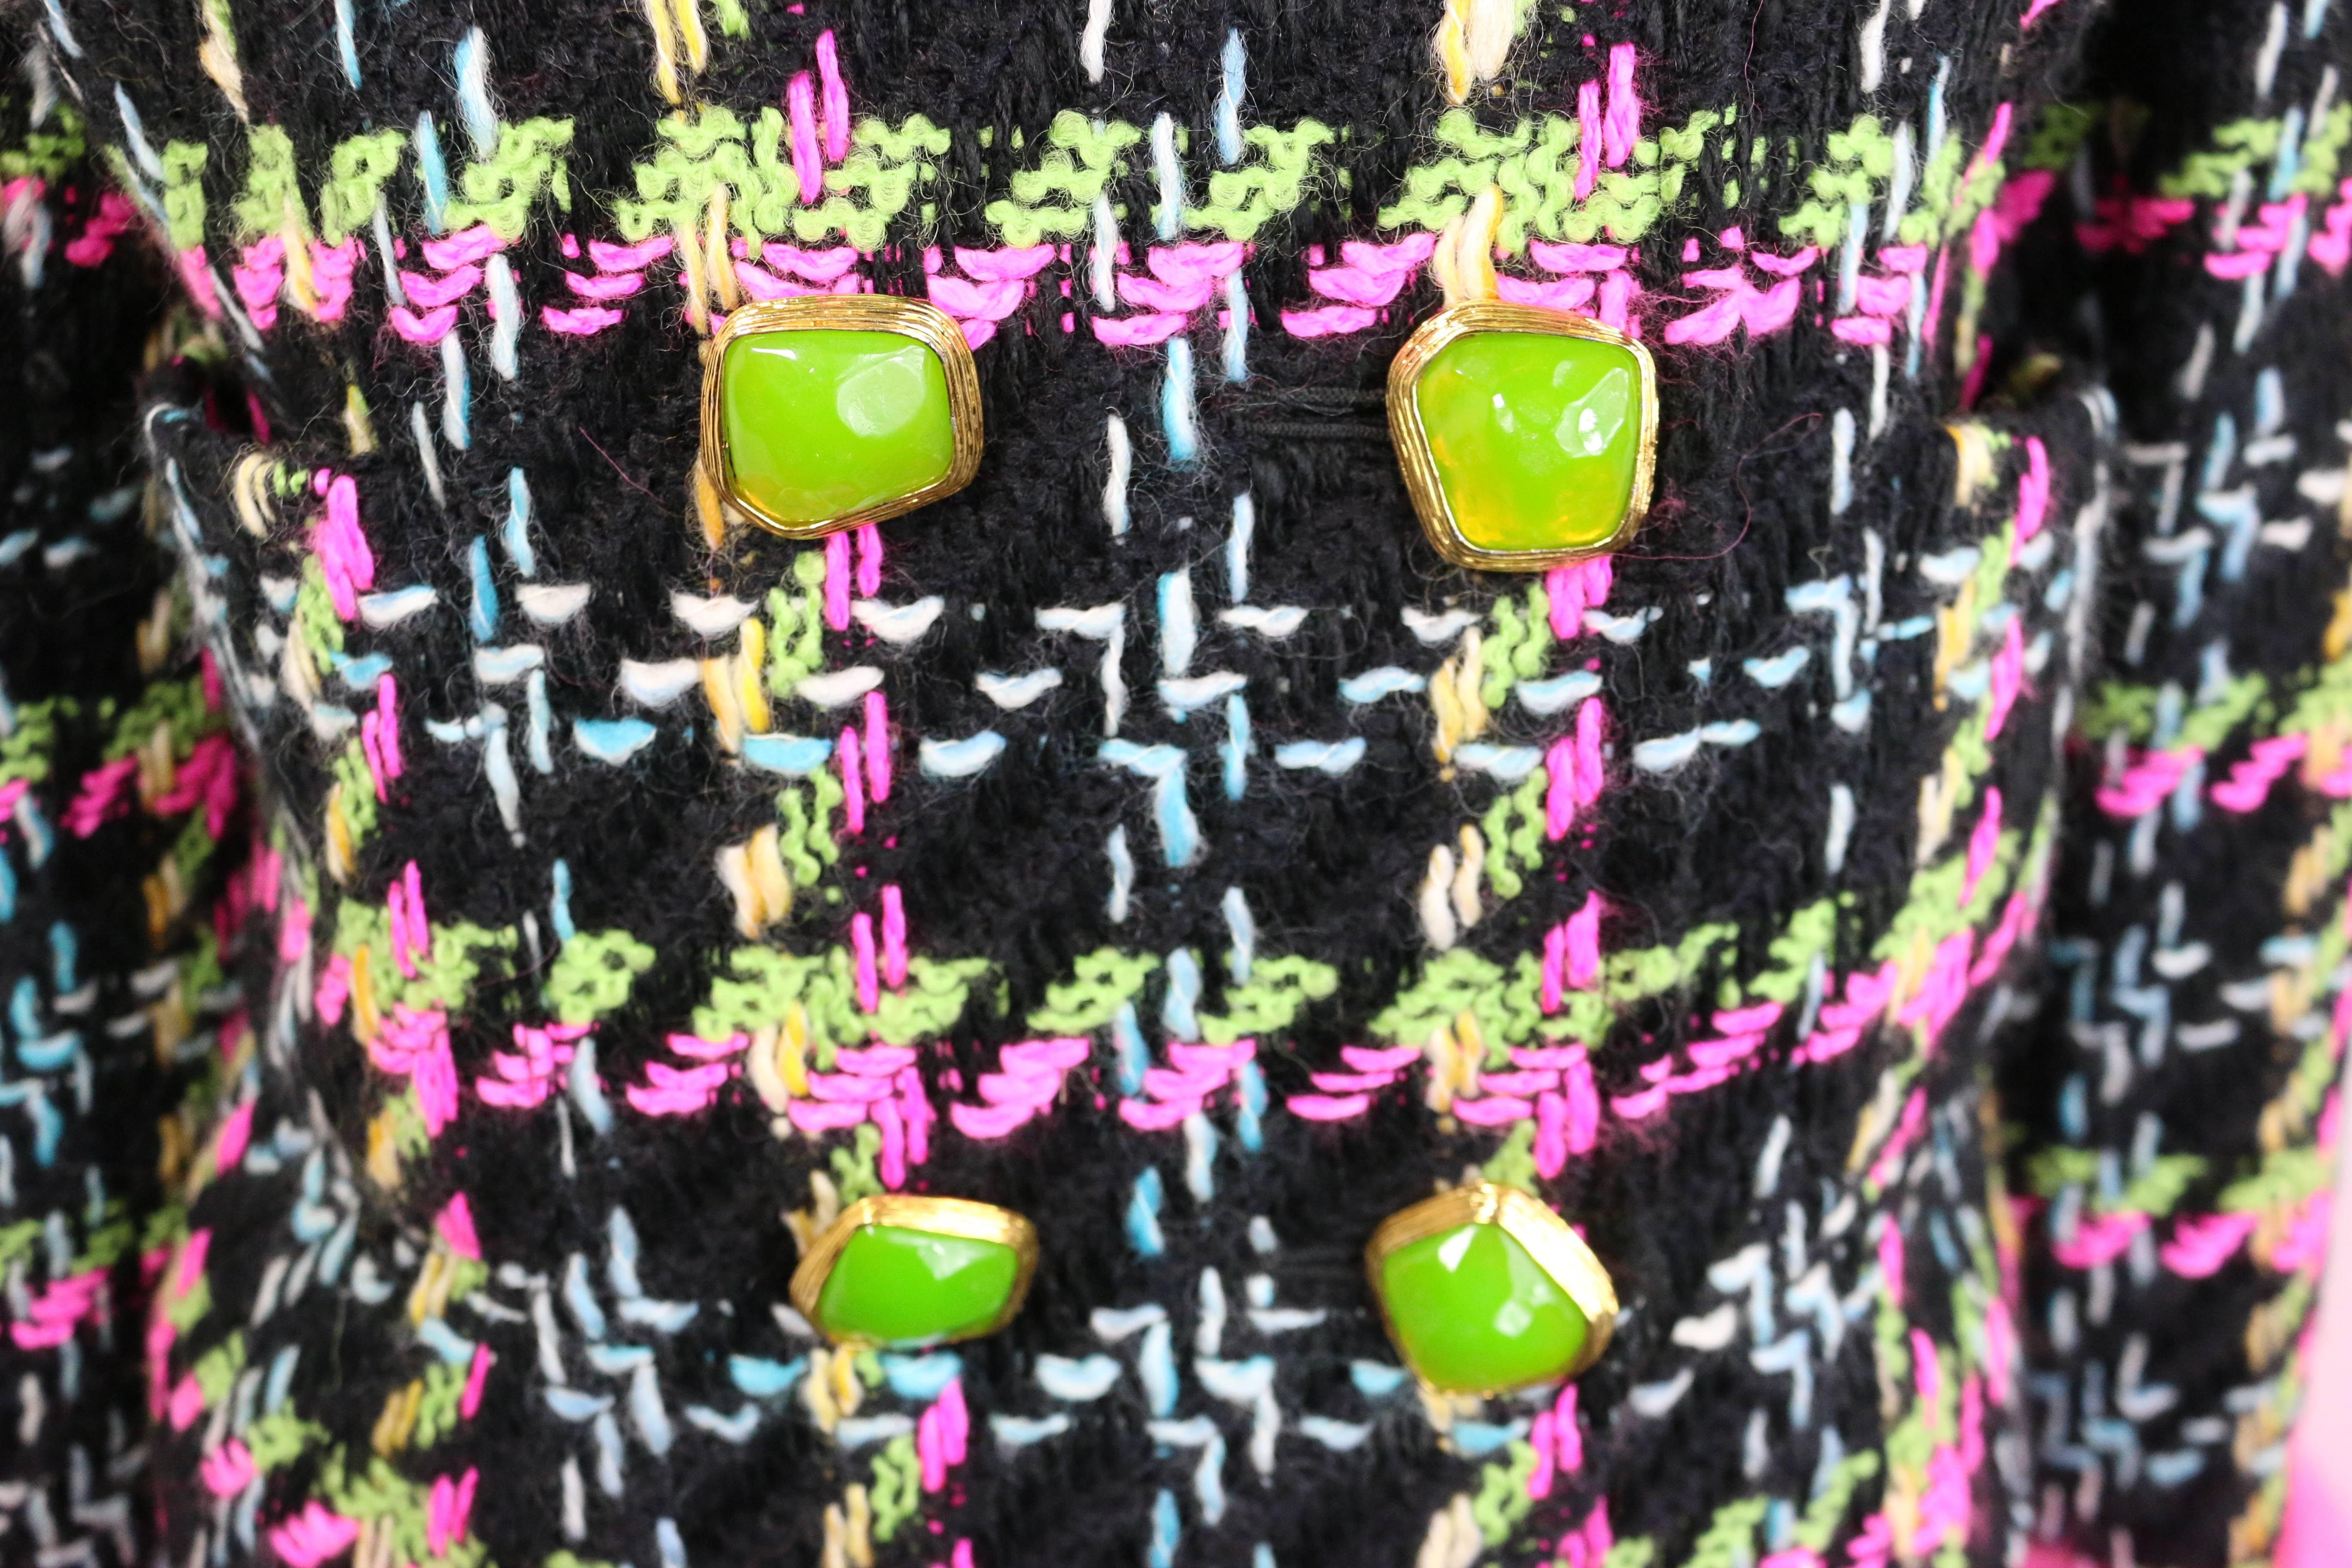 - Vintage Christian Lacroix double breasted multi-colours(neon green, pink, black,  white, blue and yellow)  houndstooth tweed wool suit and skirt ensemble. It is a very eye catching and one of a kind piece!!! 

- Featuring shocking pink feathers